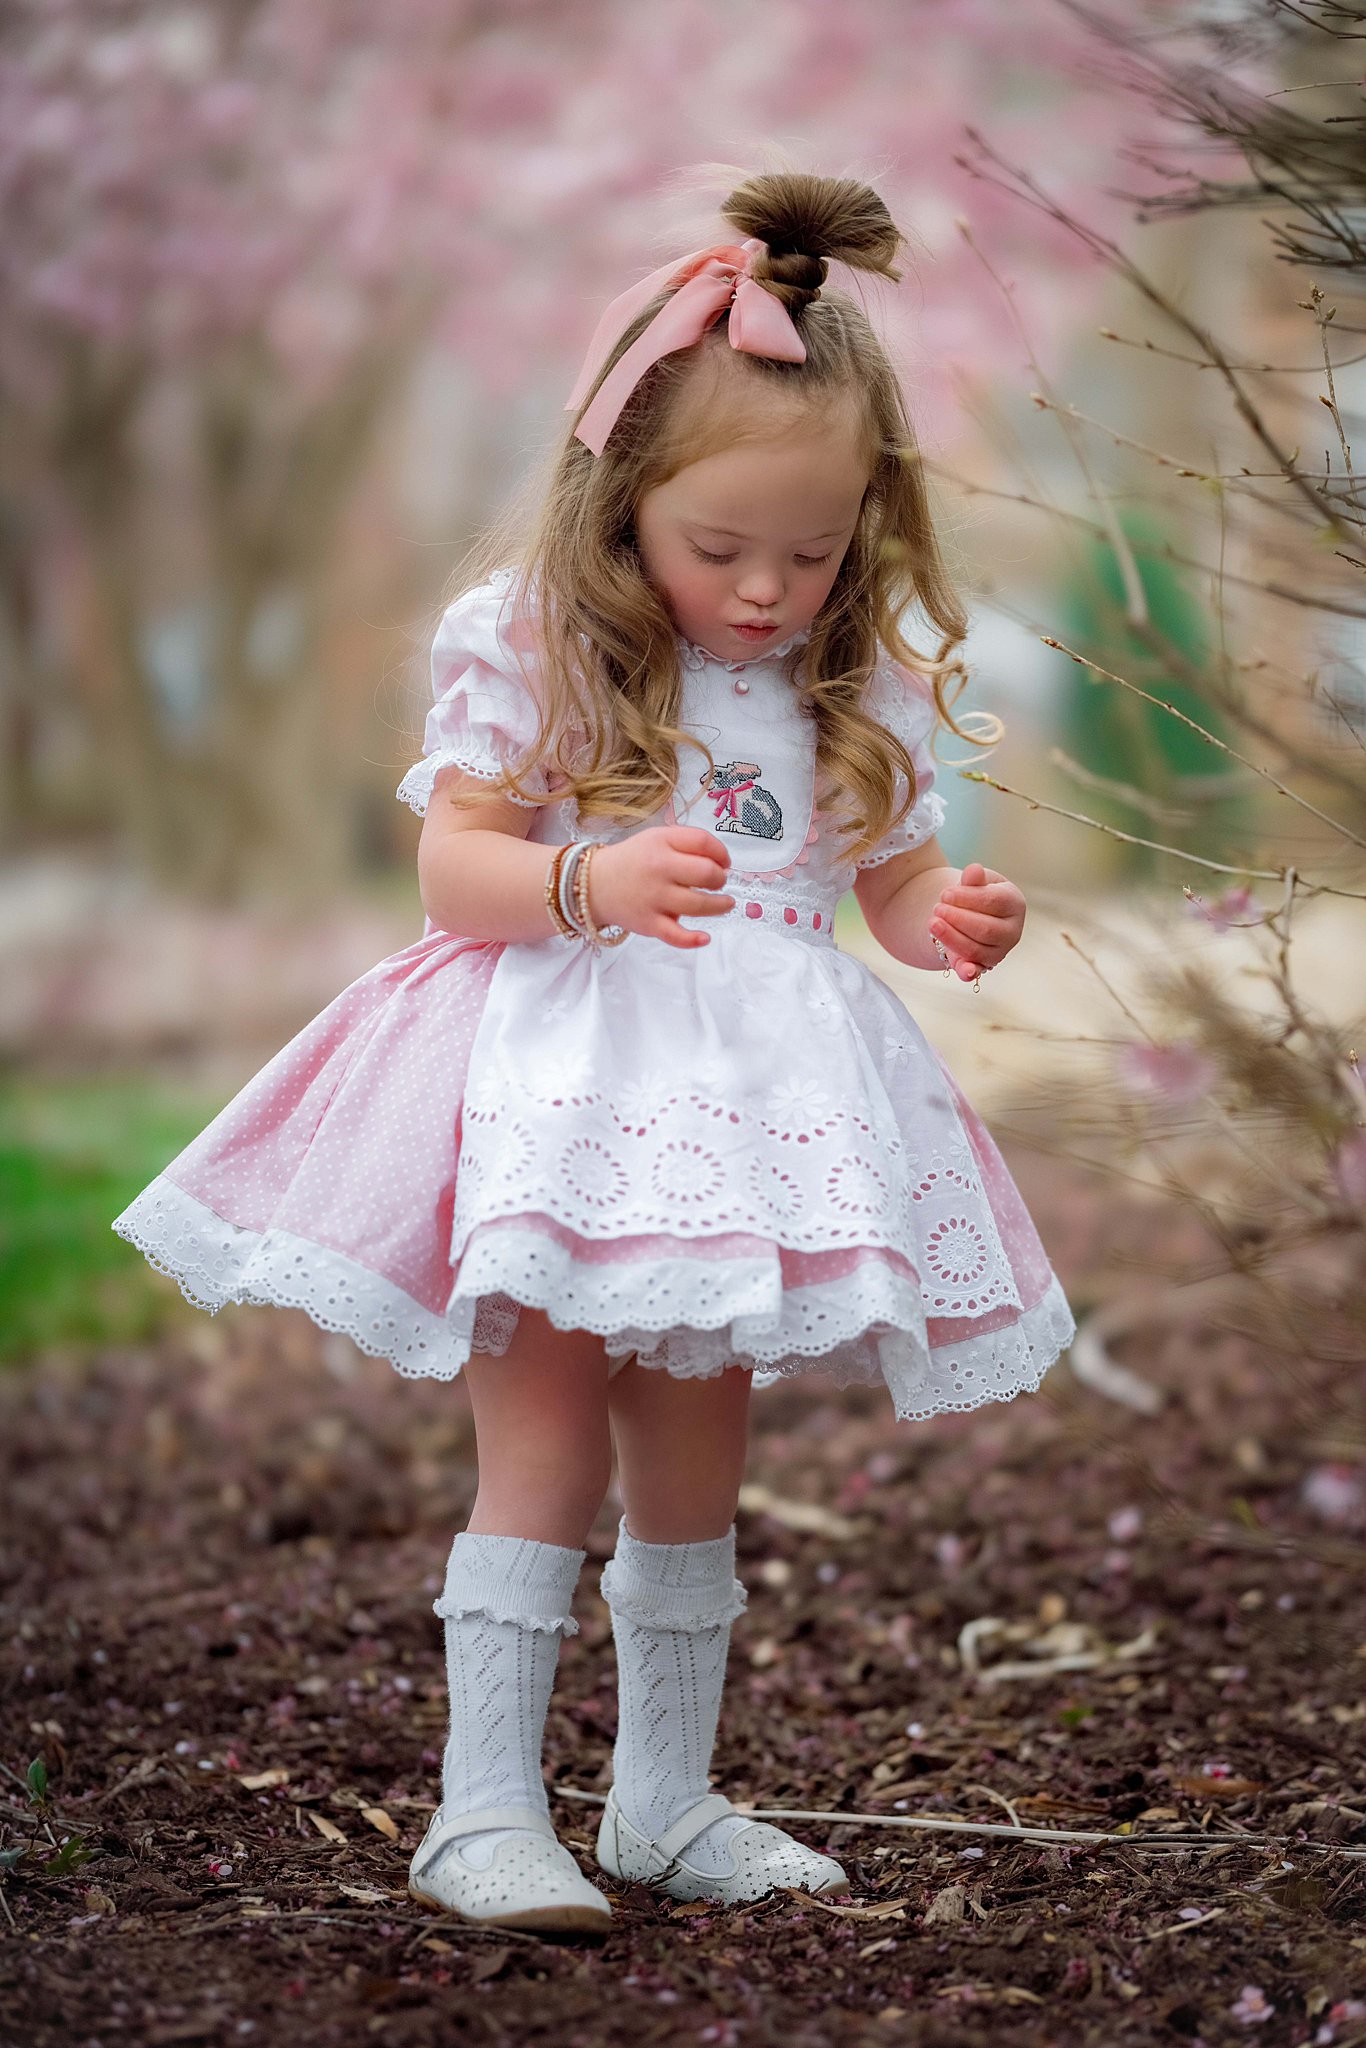 A young girl in a pink and white dress plays in a park with pink tree blossoms Children’s Boutique Raleigh NC